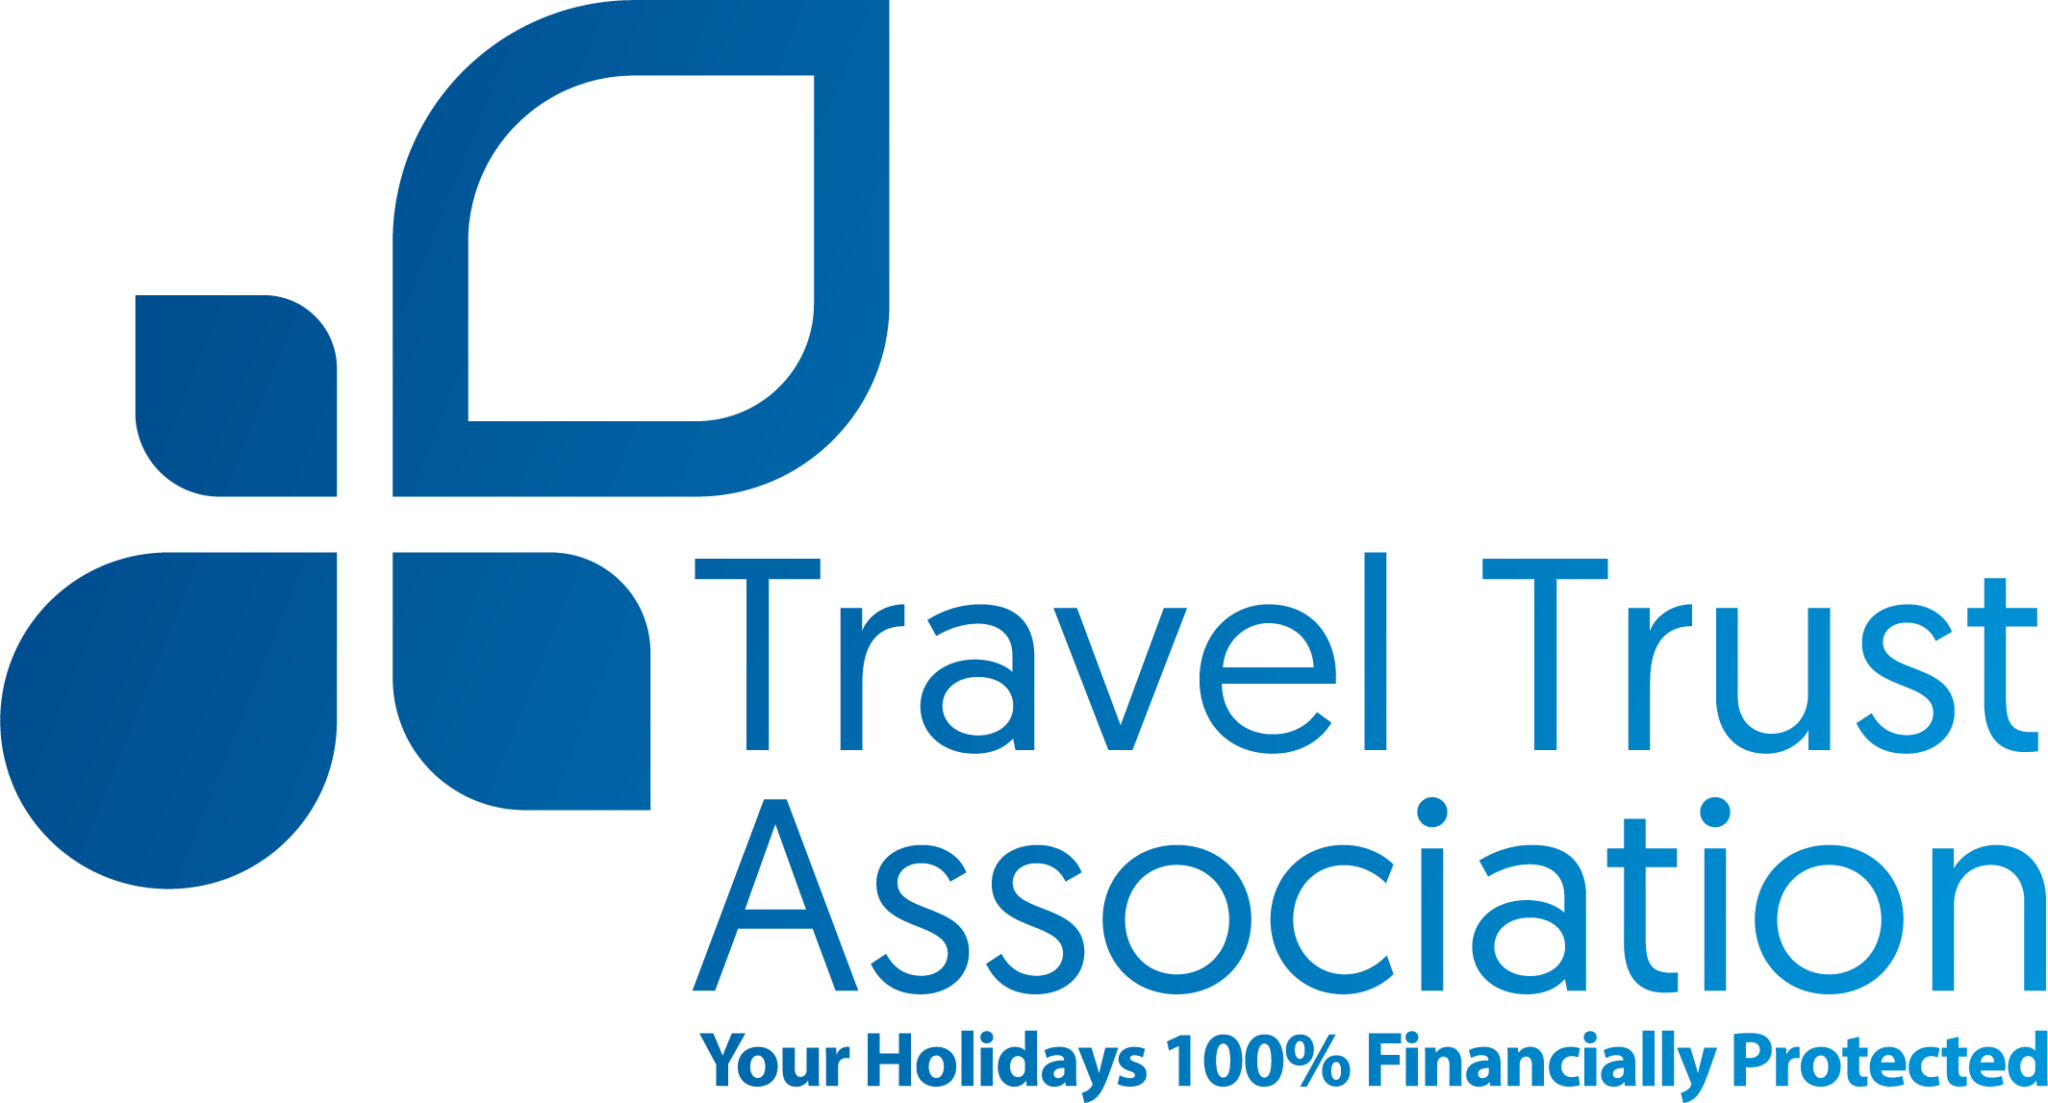 Travel Trust Association The Travel Network Group